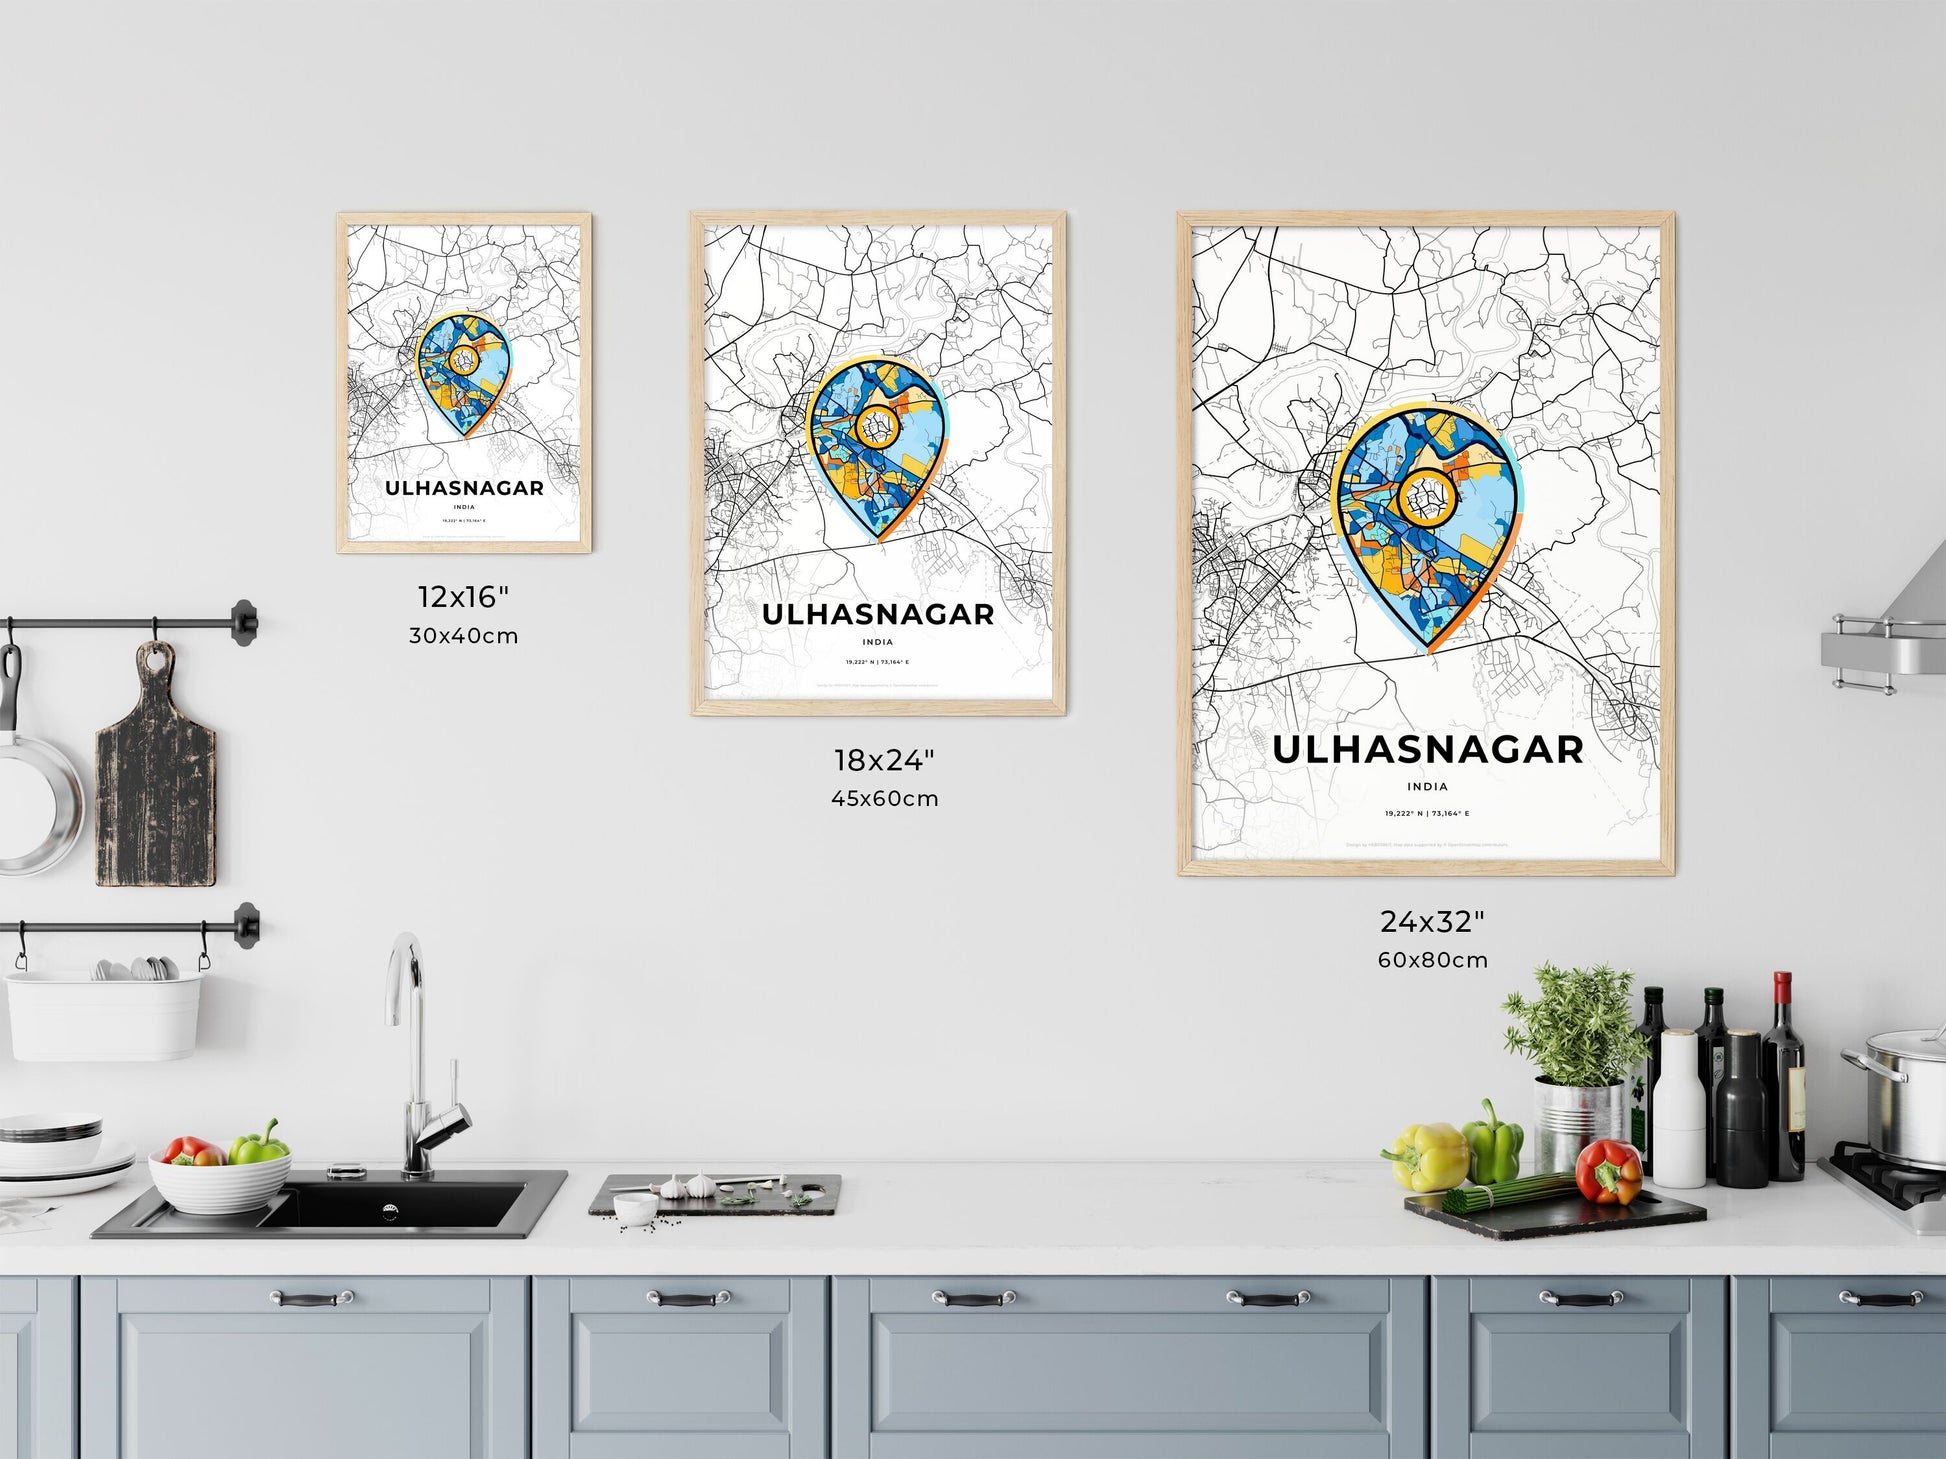 ULHASNAGAR INDIA minimal art map with a colorful icon.